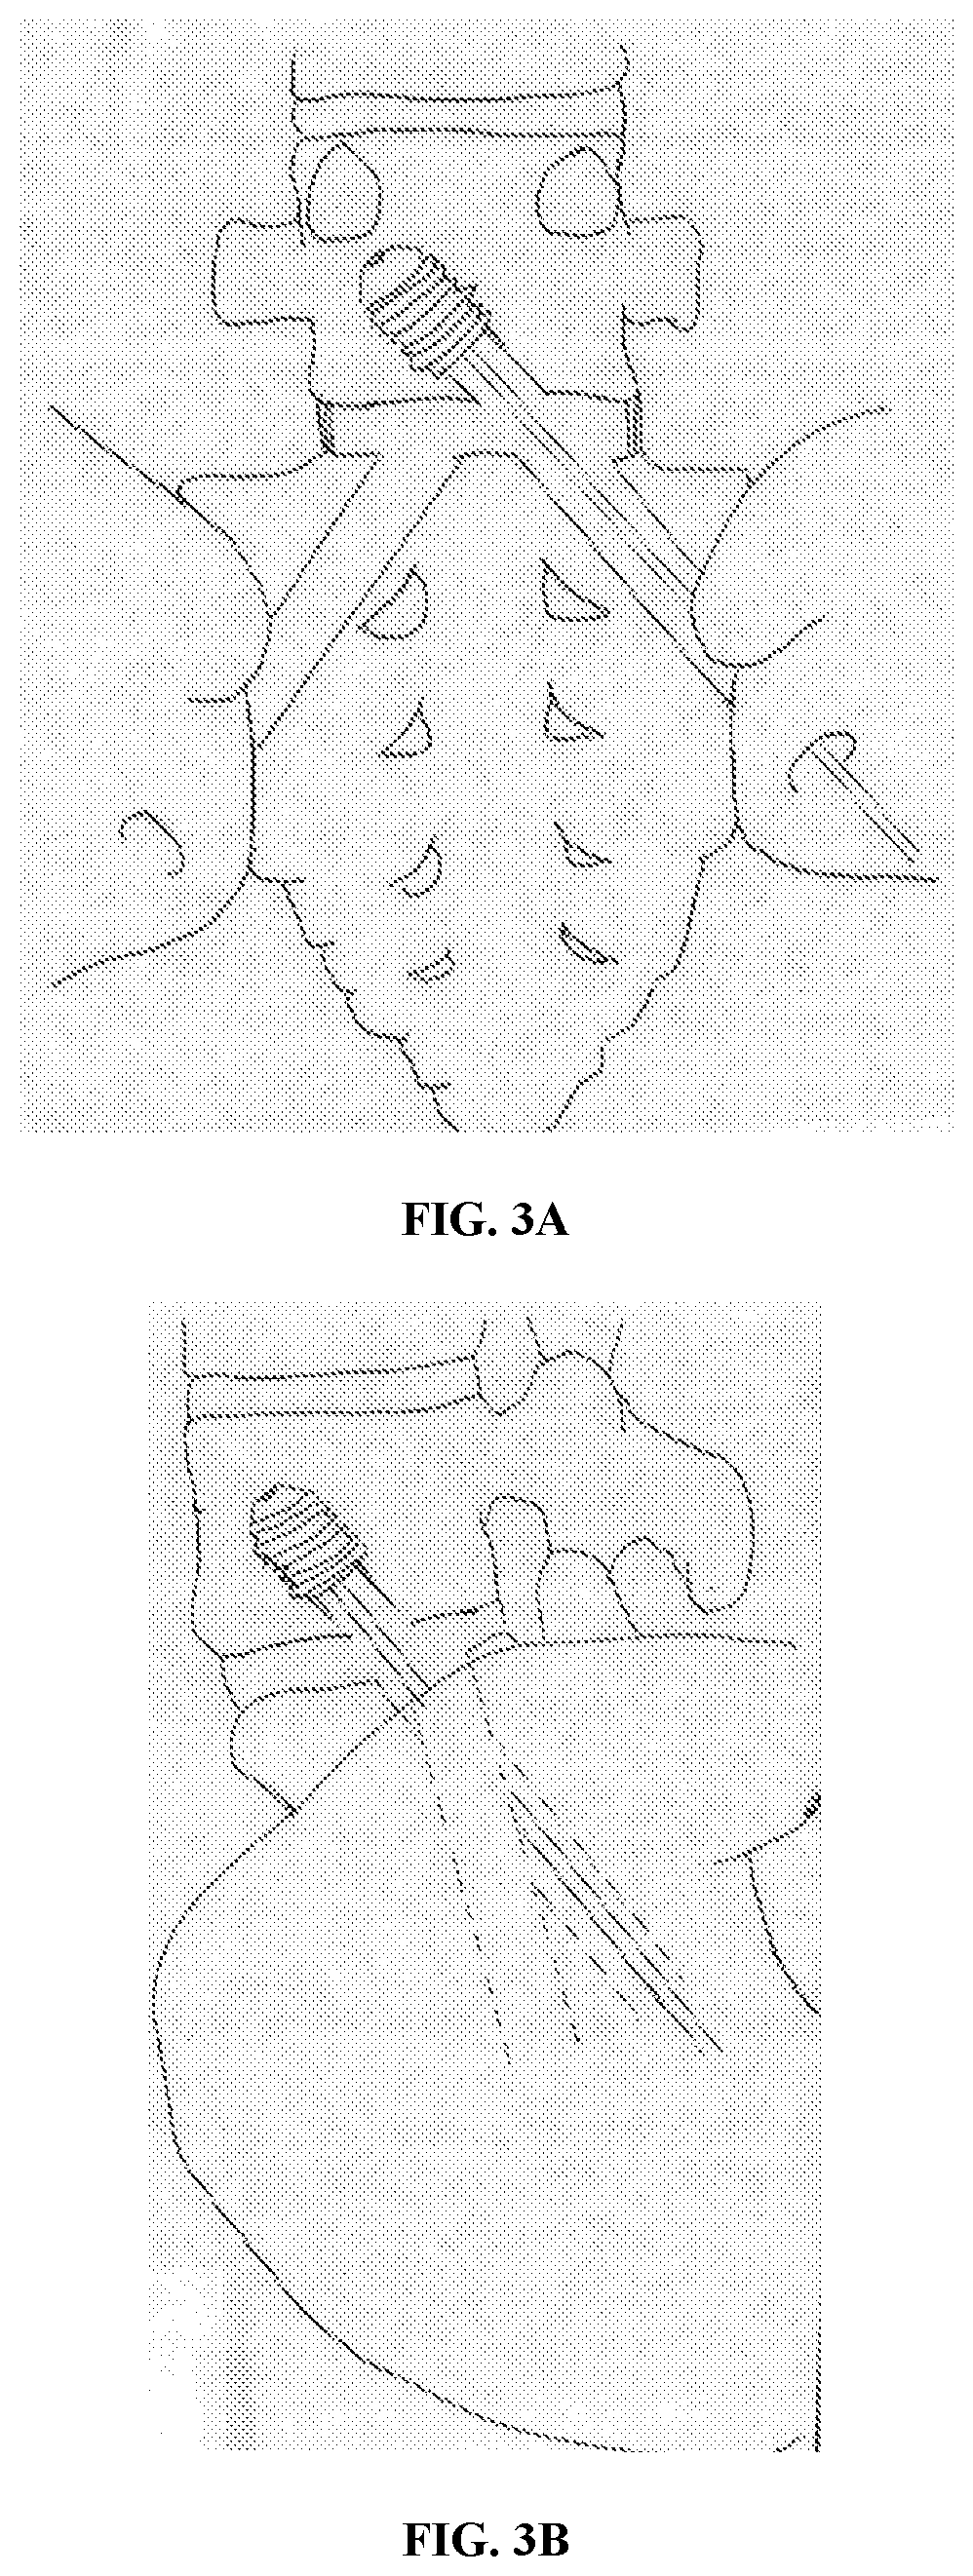 Interlocking implant with expandable fixation means for l5-s1 spinal fusion and/or fixation